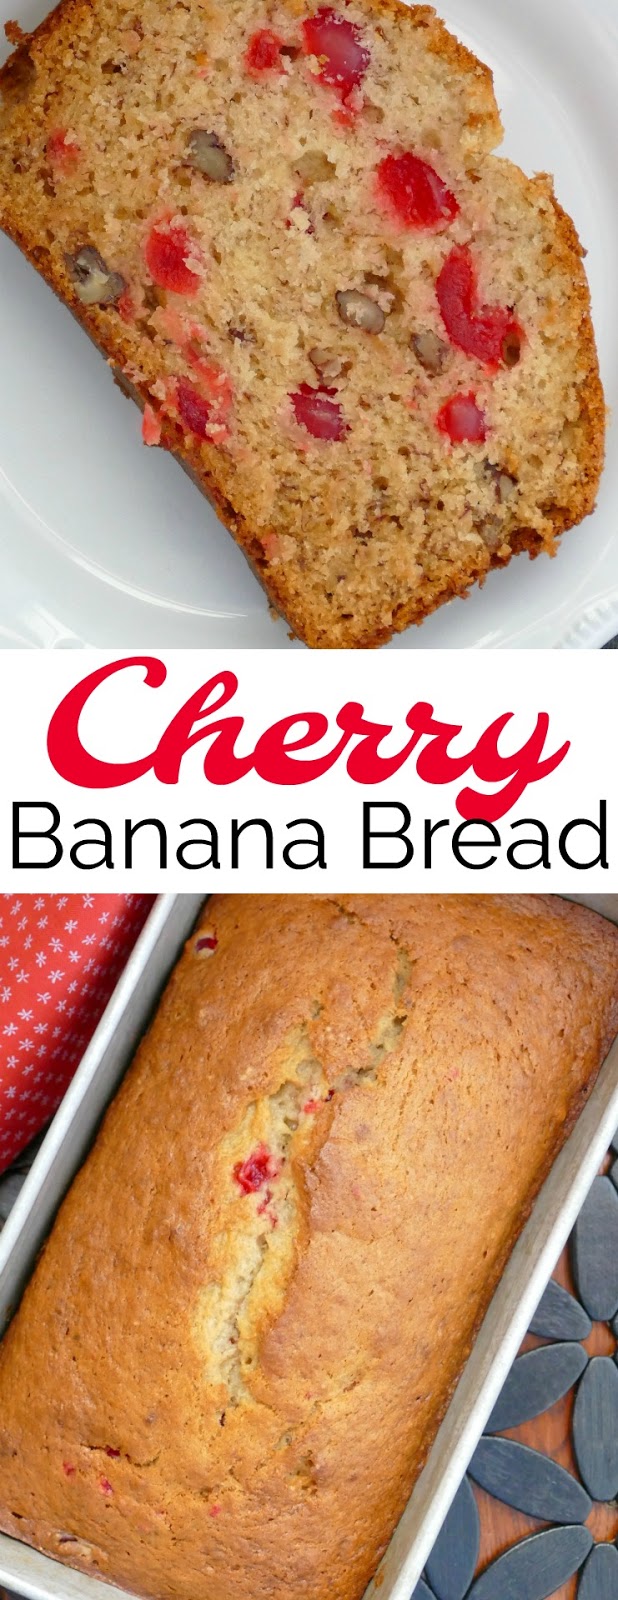 This delicious and easy quick bread is such a great way to use those ripe bananas! The maraschino cherries and pecans add so much flavor and it's great for breakfast, snack, the lunchbox or dessert!